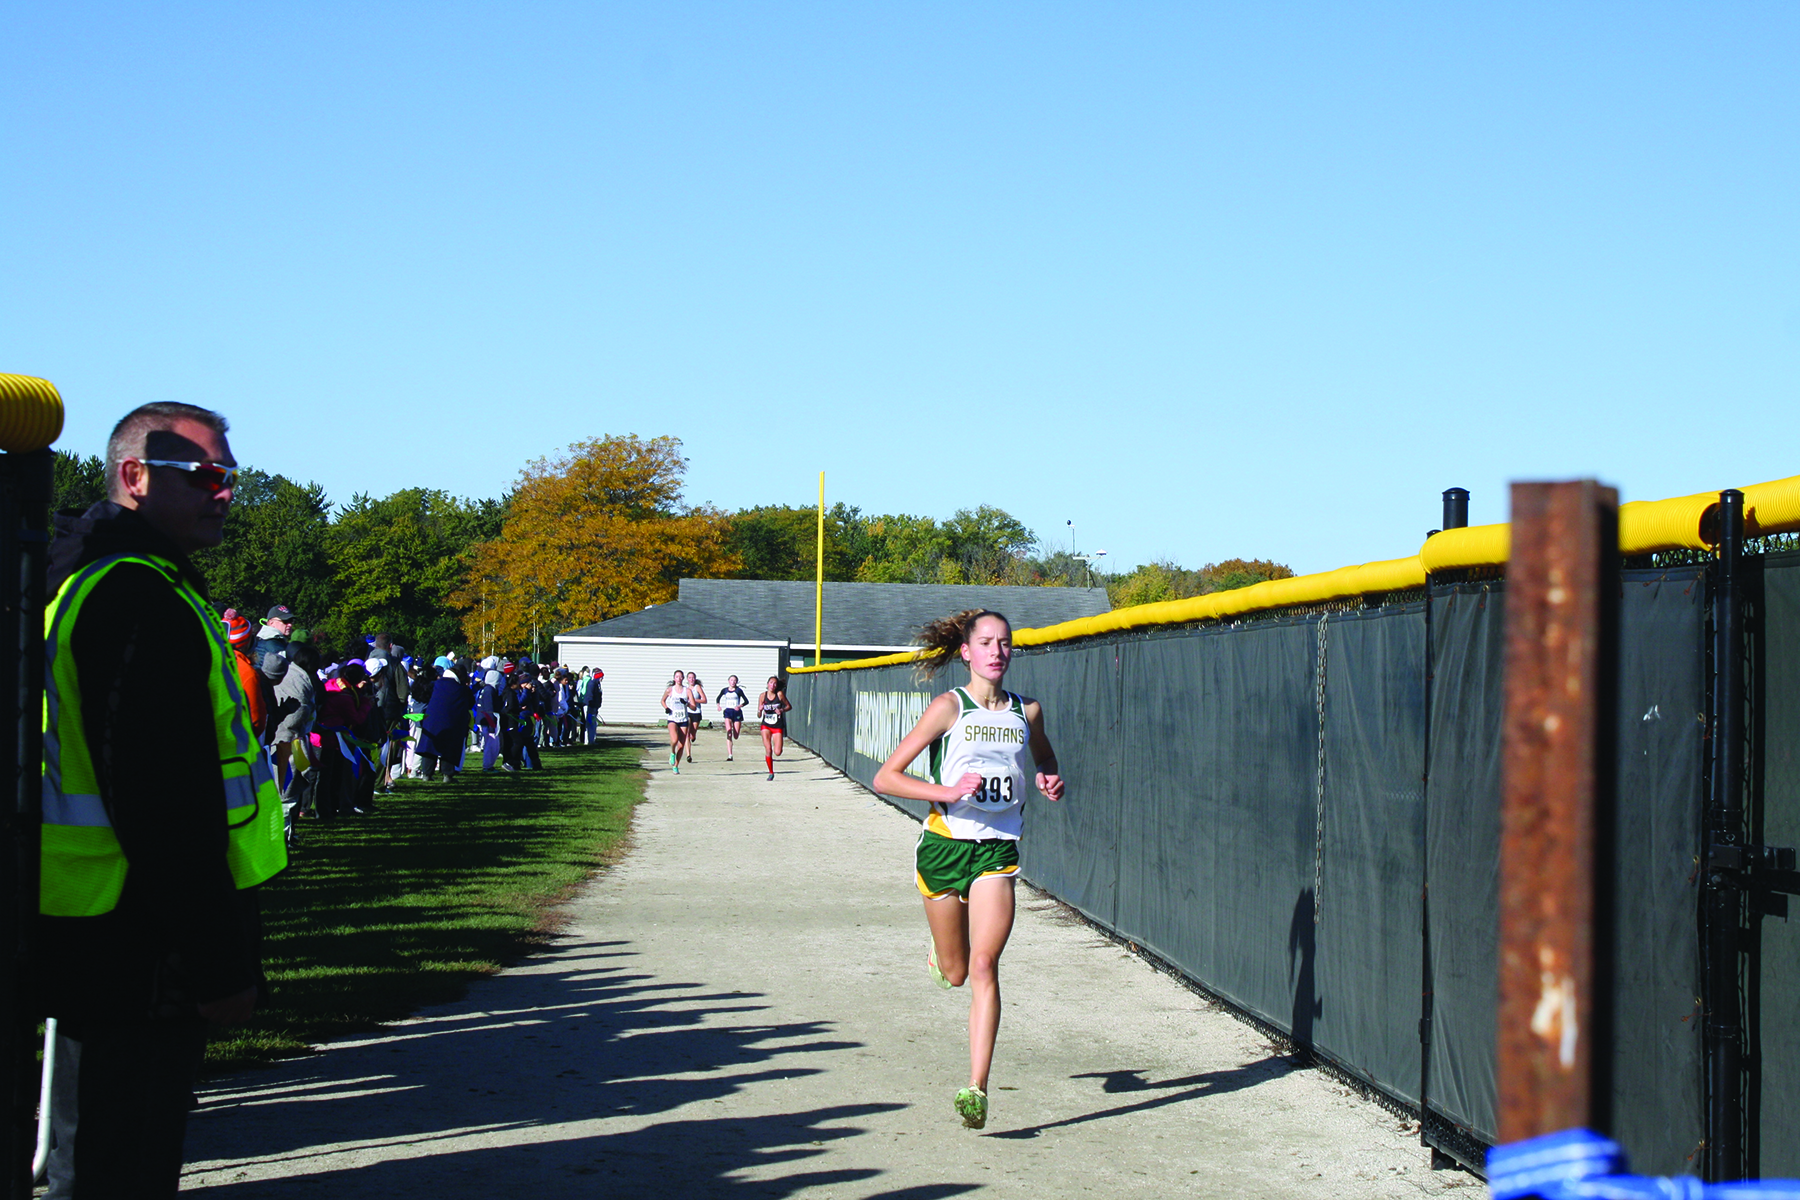 Sophomore Juliet Frum races at the conference meet on Oct. 15, where she placed first and finished with a time of 17:25 for the 3-mile race. At sectionals, Frum finished with a time of 16:53, placing second while also breaking the school record.